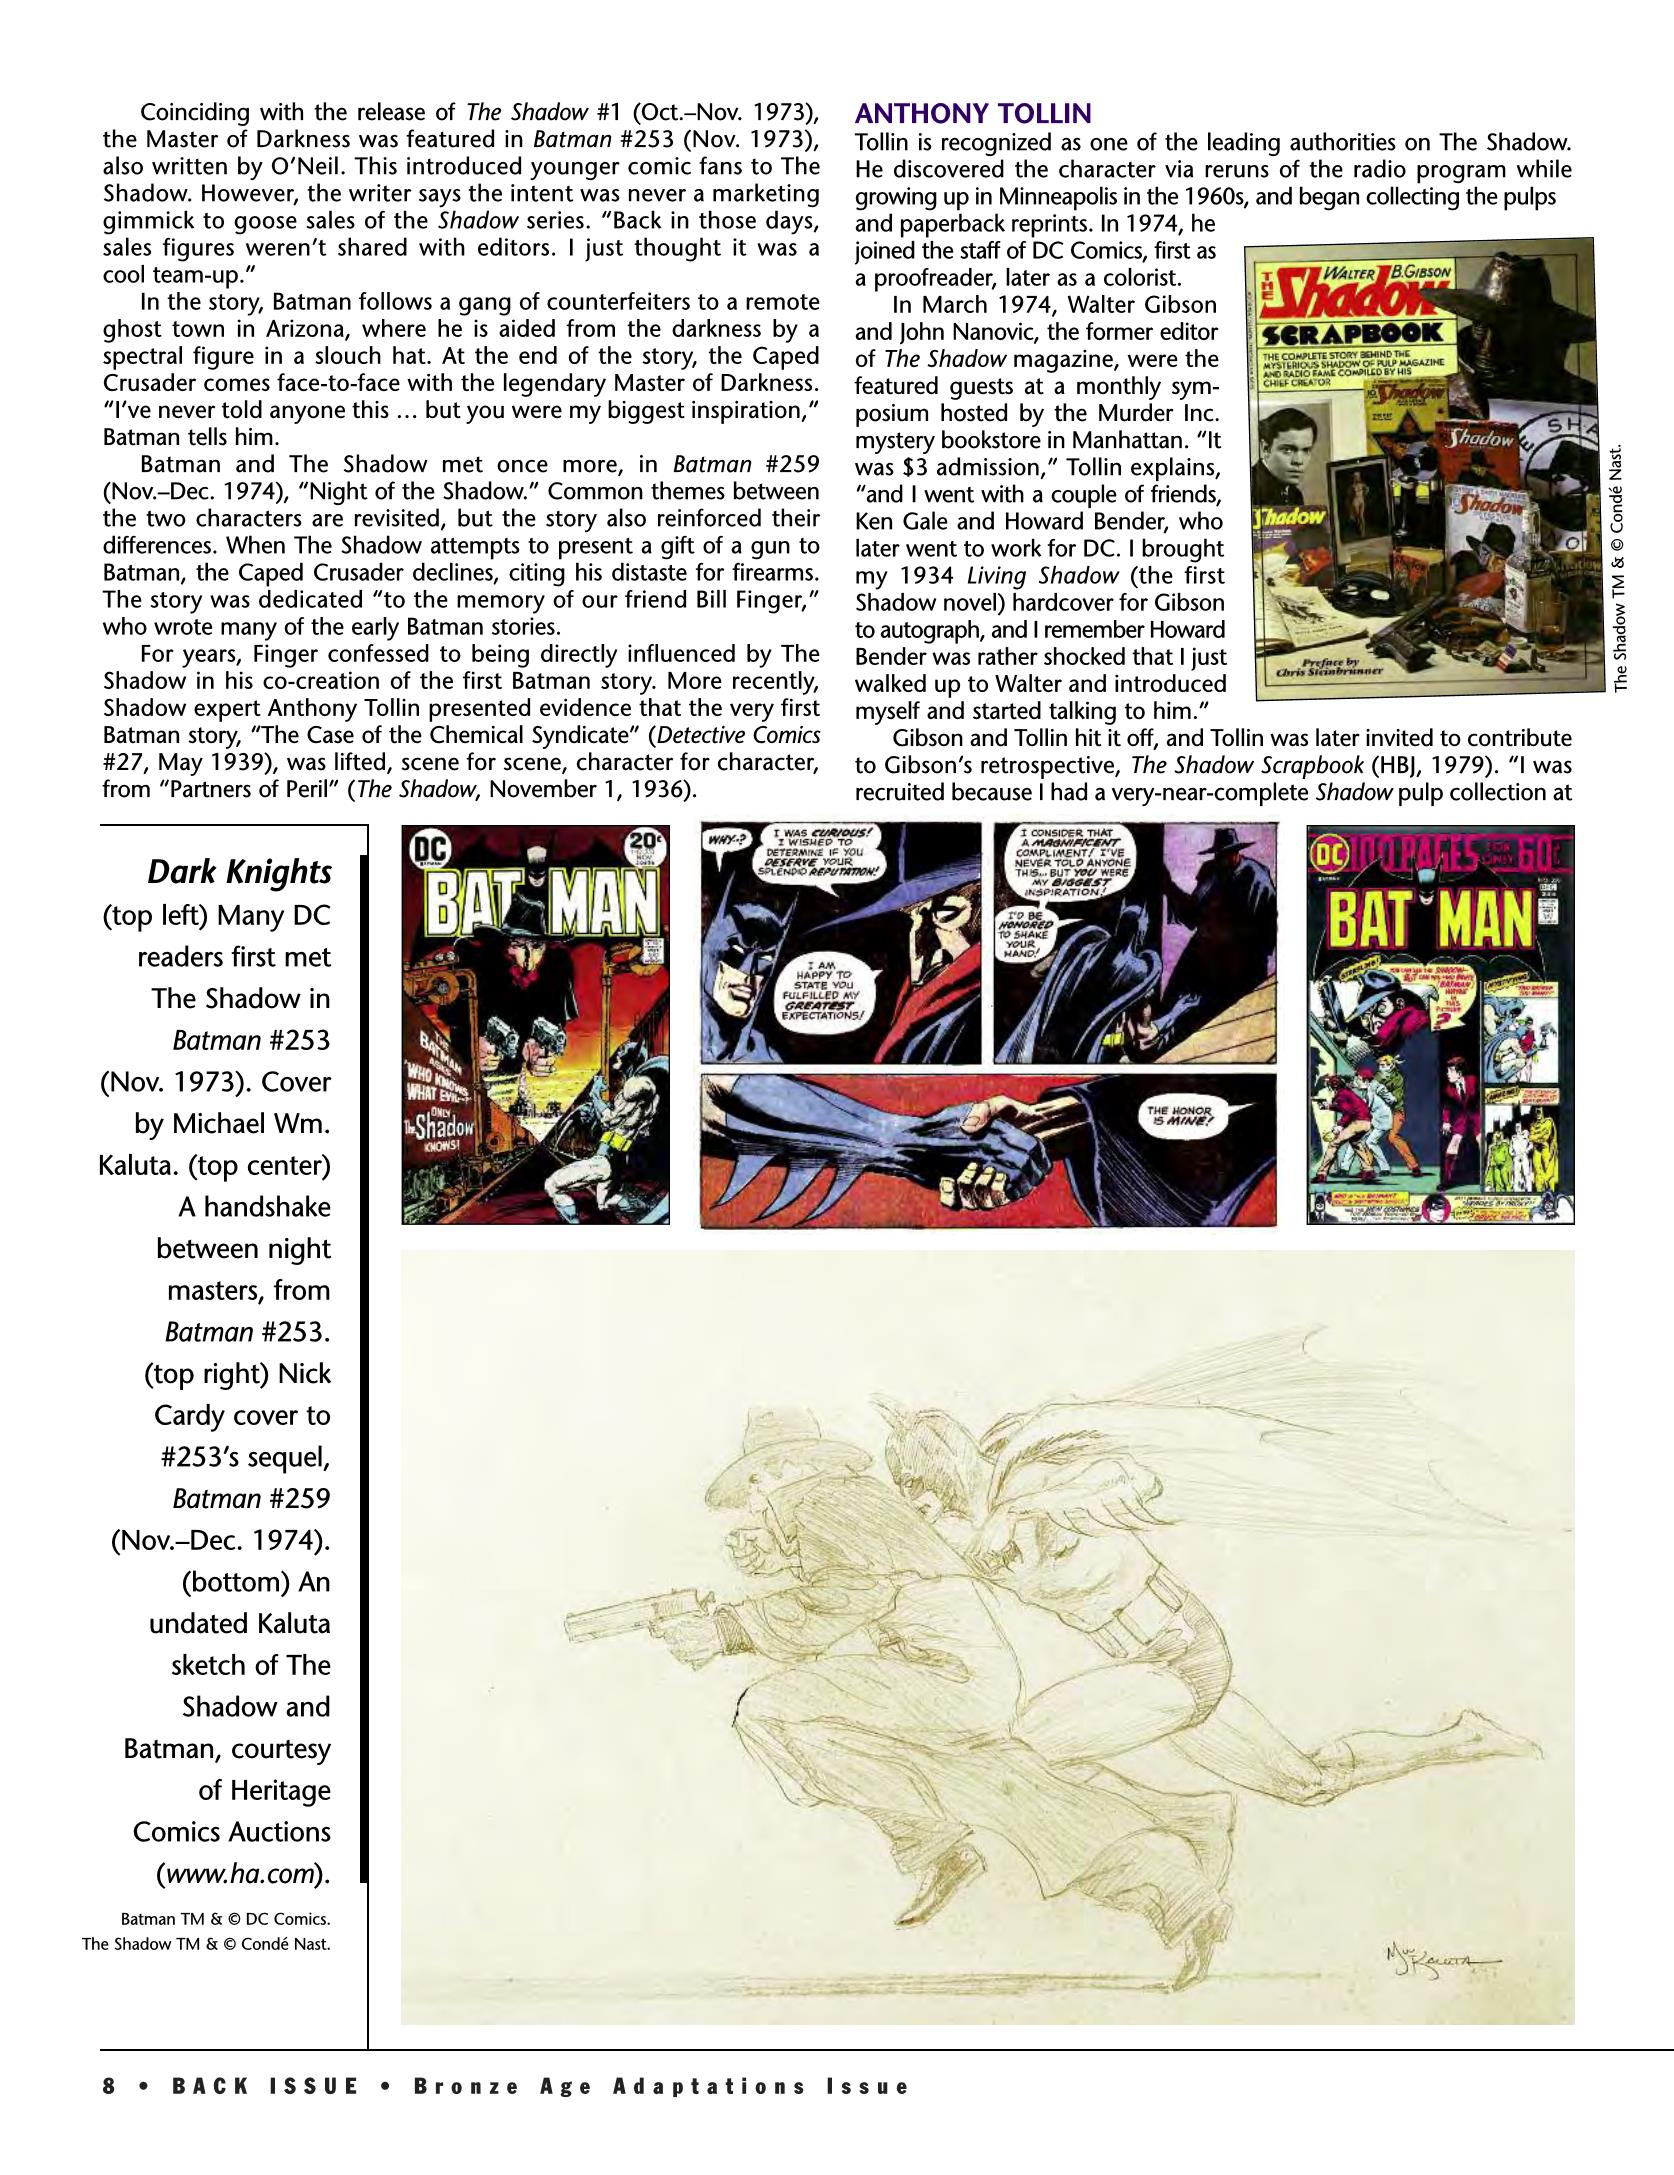 Read online Back Issue comic -  Issue #89 - 2